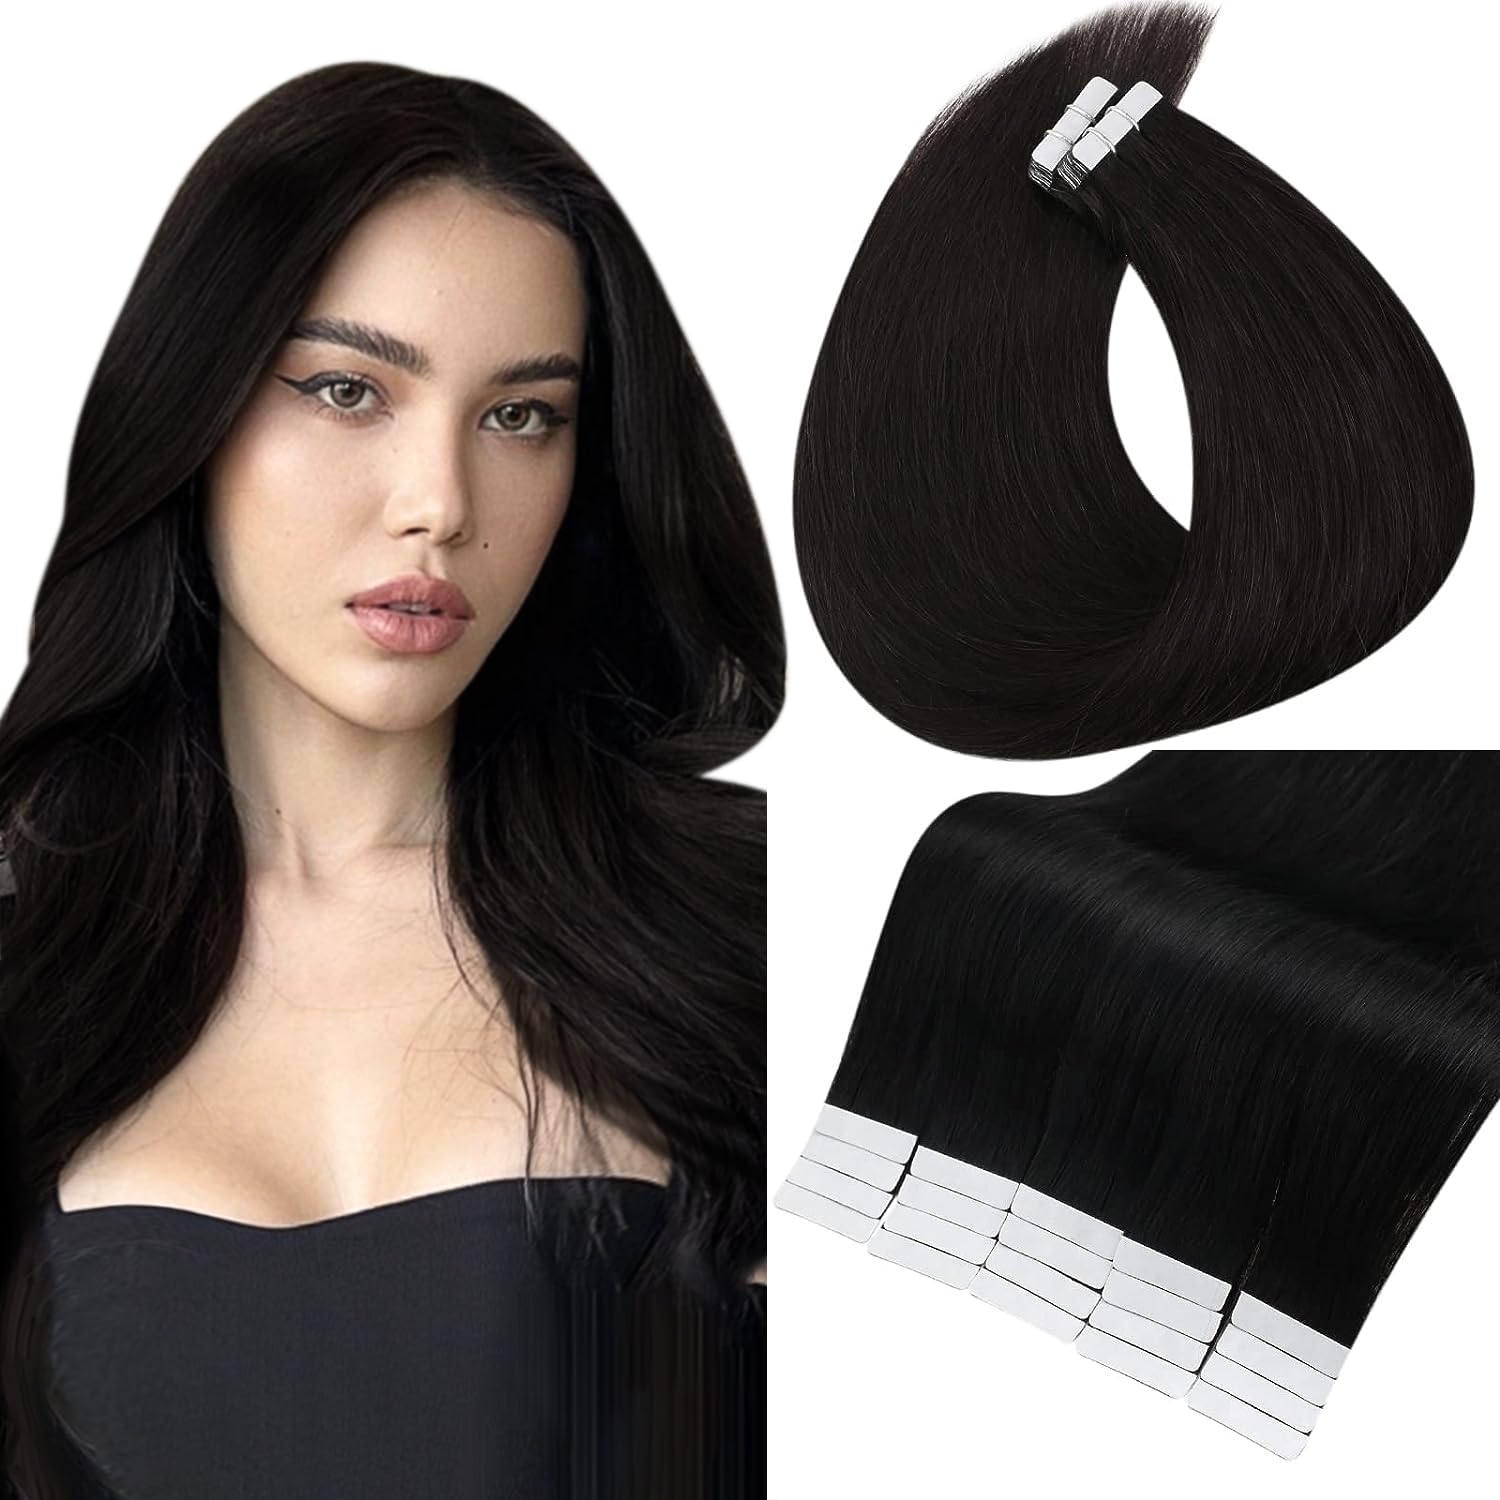 18 Inch Human Hair Tape in Extension Color Off Black 1B Remy Tape in Human Hair Extensions 40 Pcs Adhesive Extensions Hair 100 Gram Skin Weft Tape..